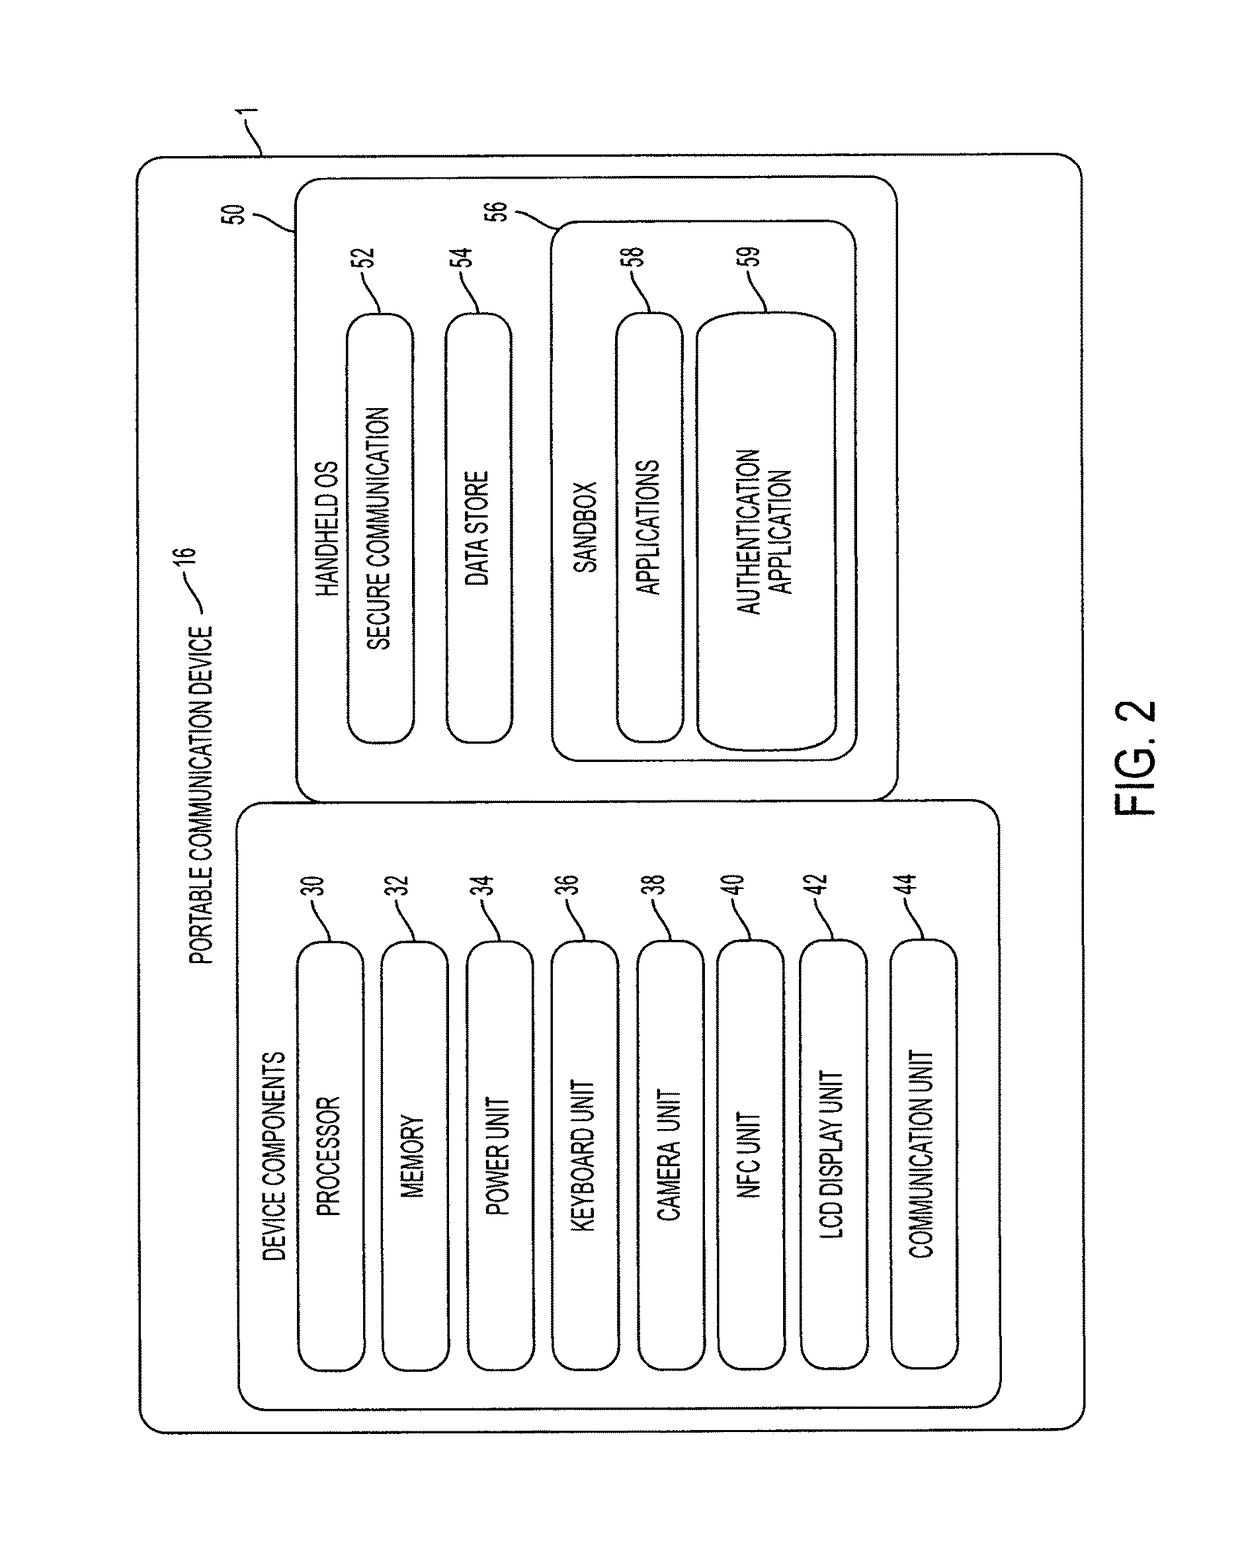 System and method for point of sale payment data credentials management using out-of-band authentication